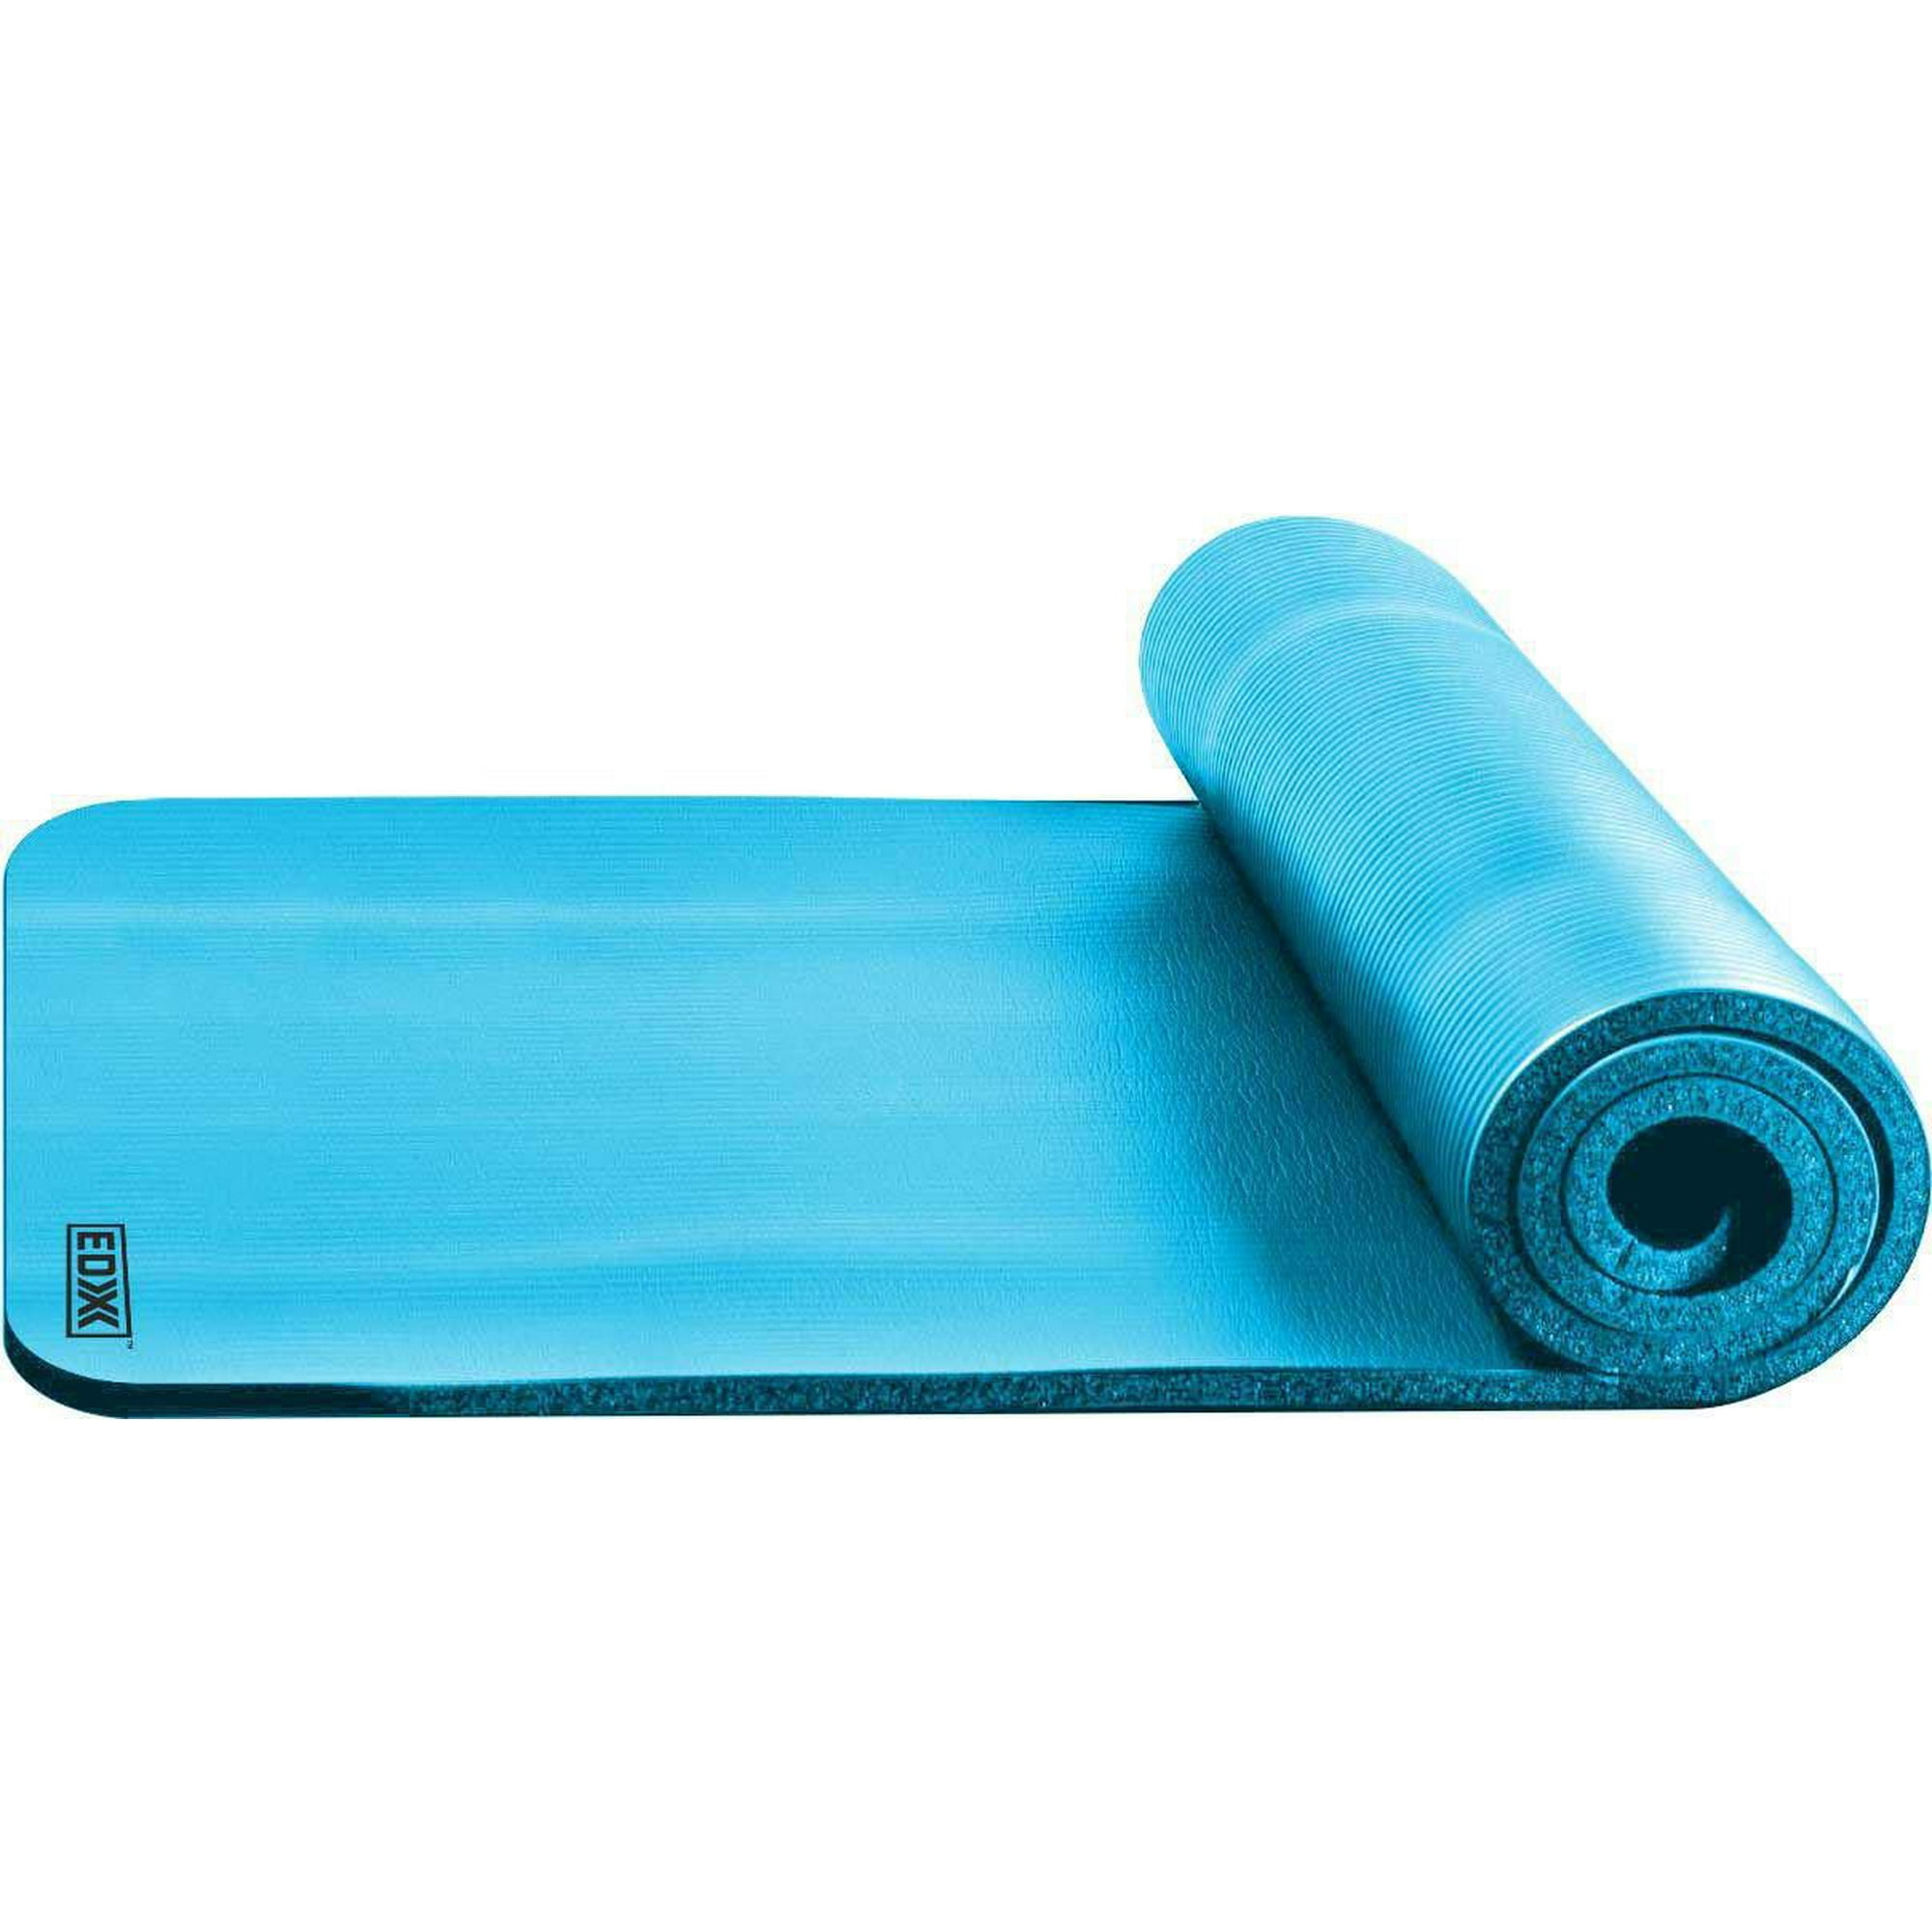 Turquoise Fair Trade Indian Handmade Brightly Coloured Yoga Mat